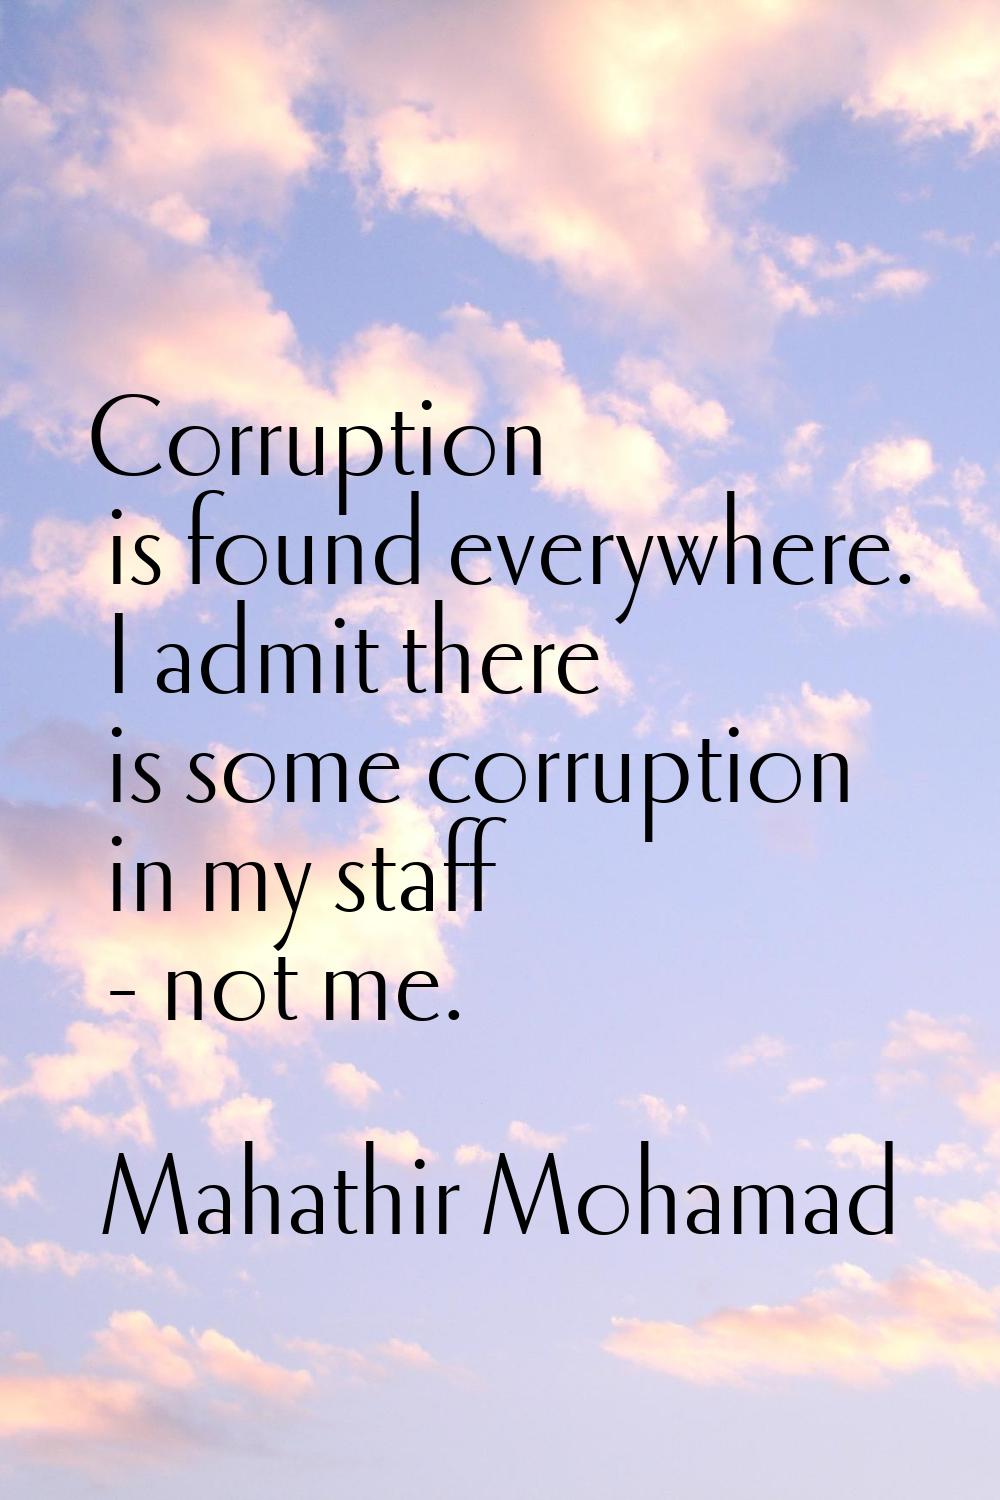 Corruption is found everywhere. I admit there is some corruption in my staff - not me.